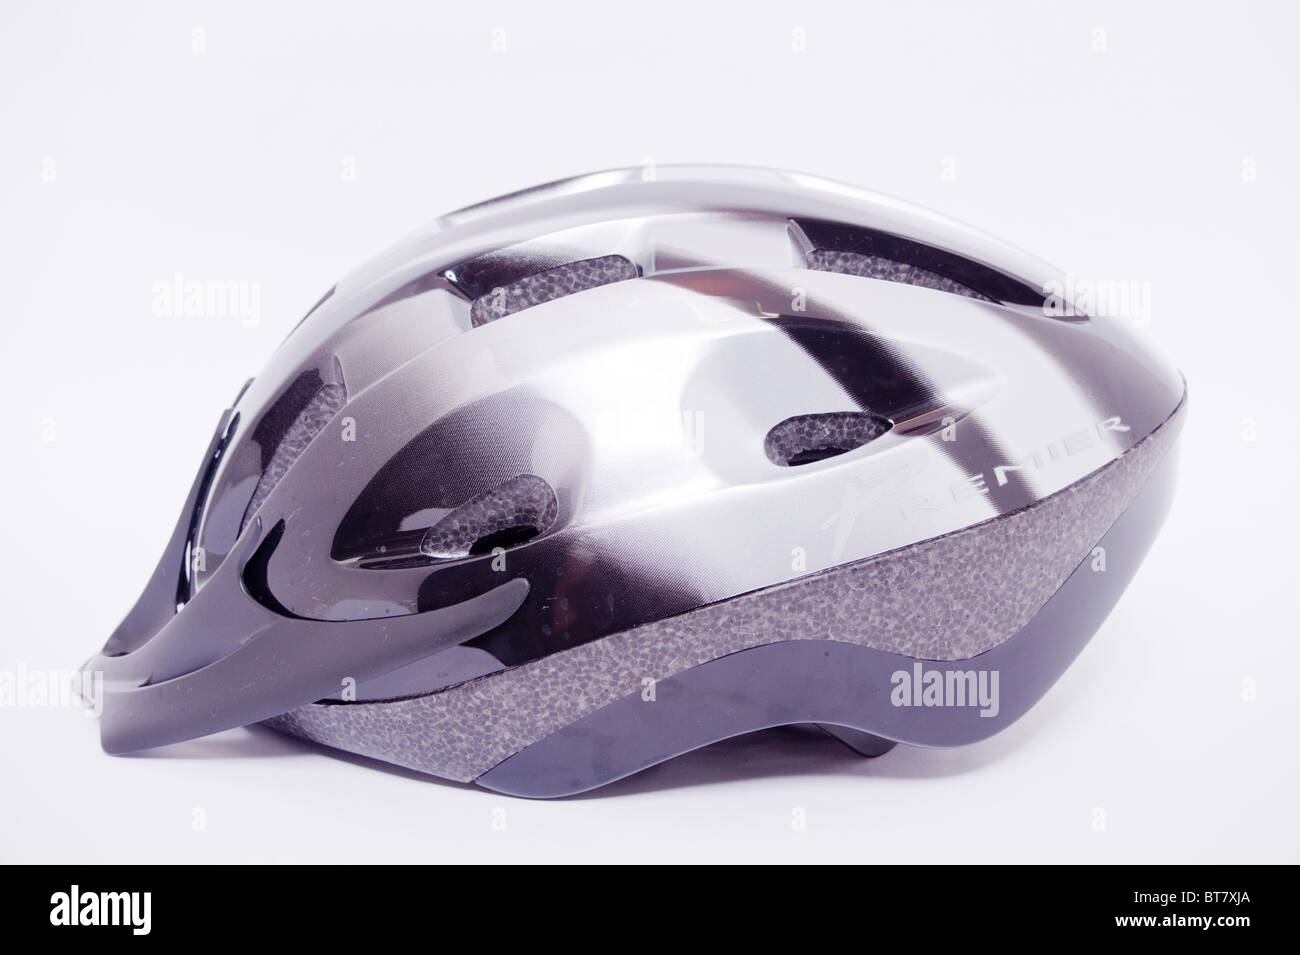 A close up photo of a cycle safety helmet against a white background Stock Photo